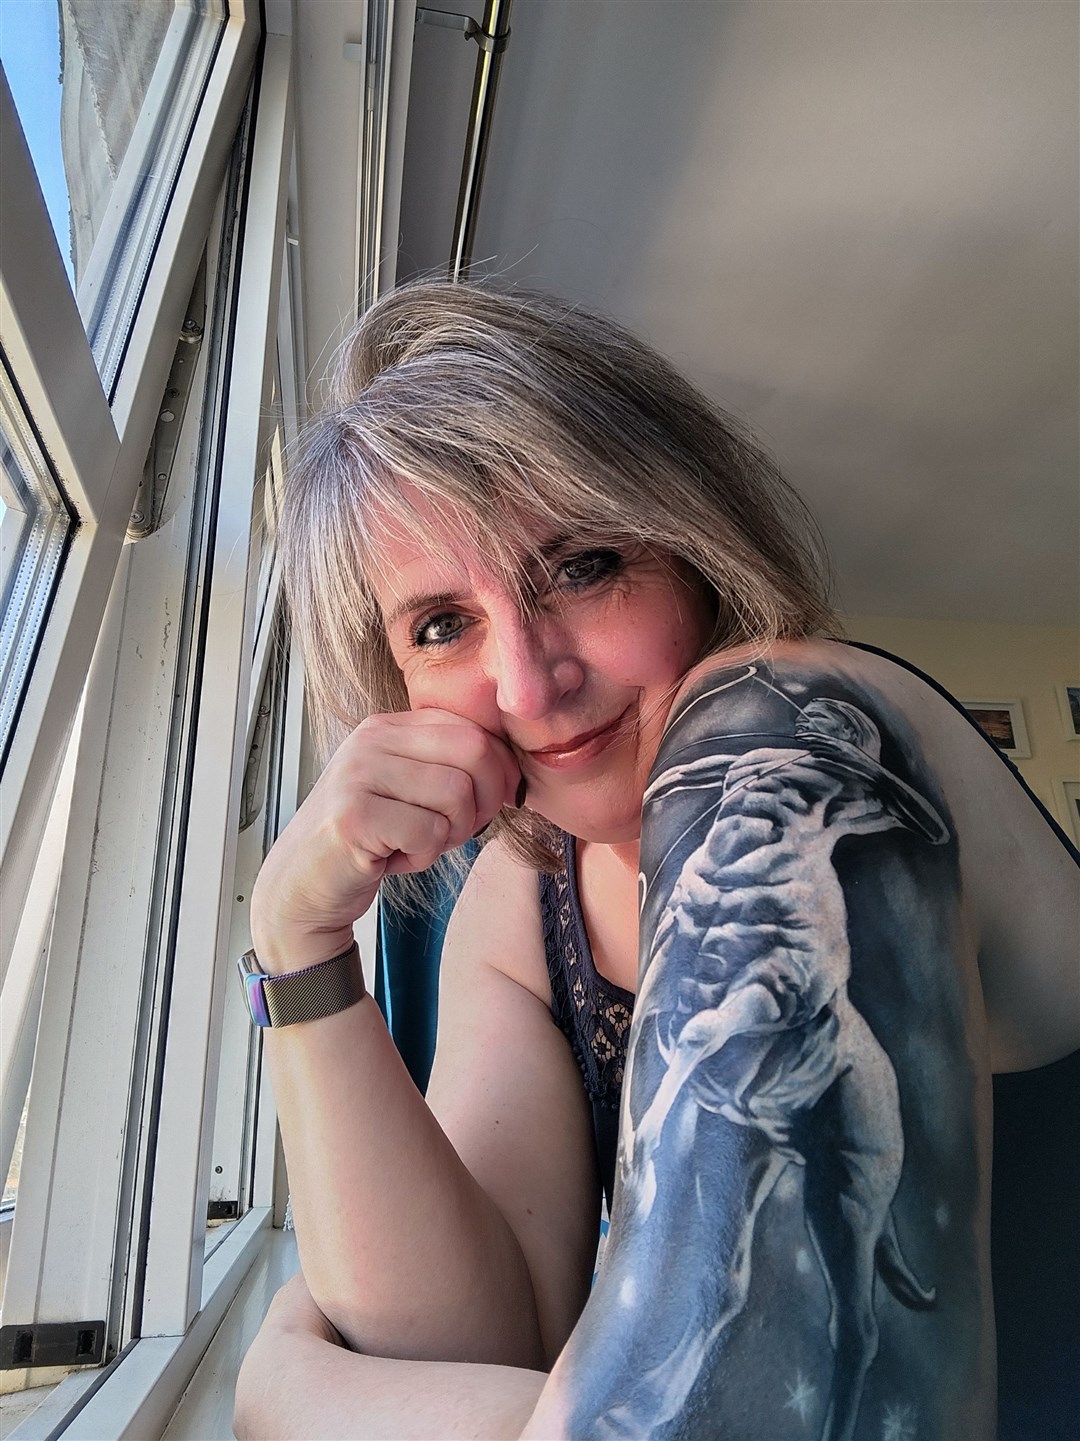 Karen reveals the story behind her amazing tattoo and what opened the floodgates for a series of planned adventures... Picture: Karen Anderson